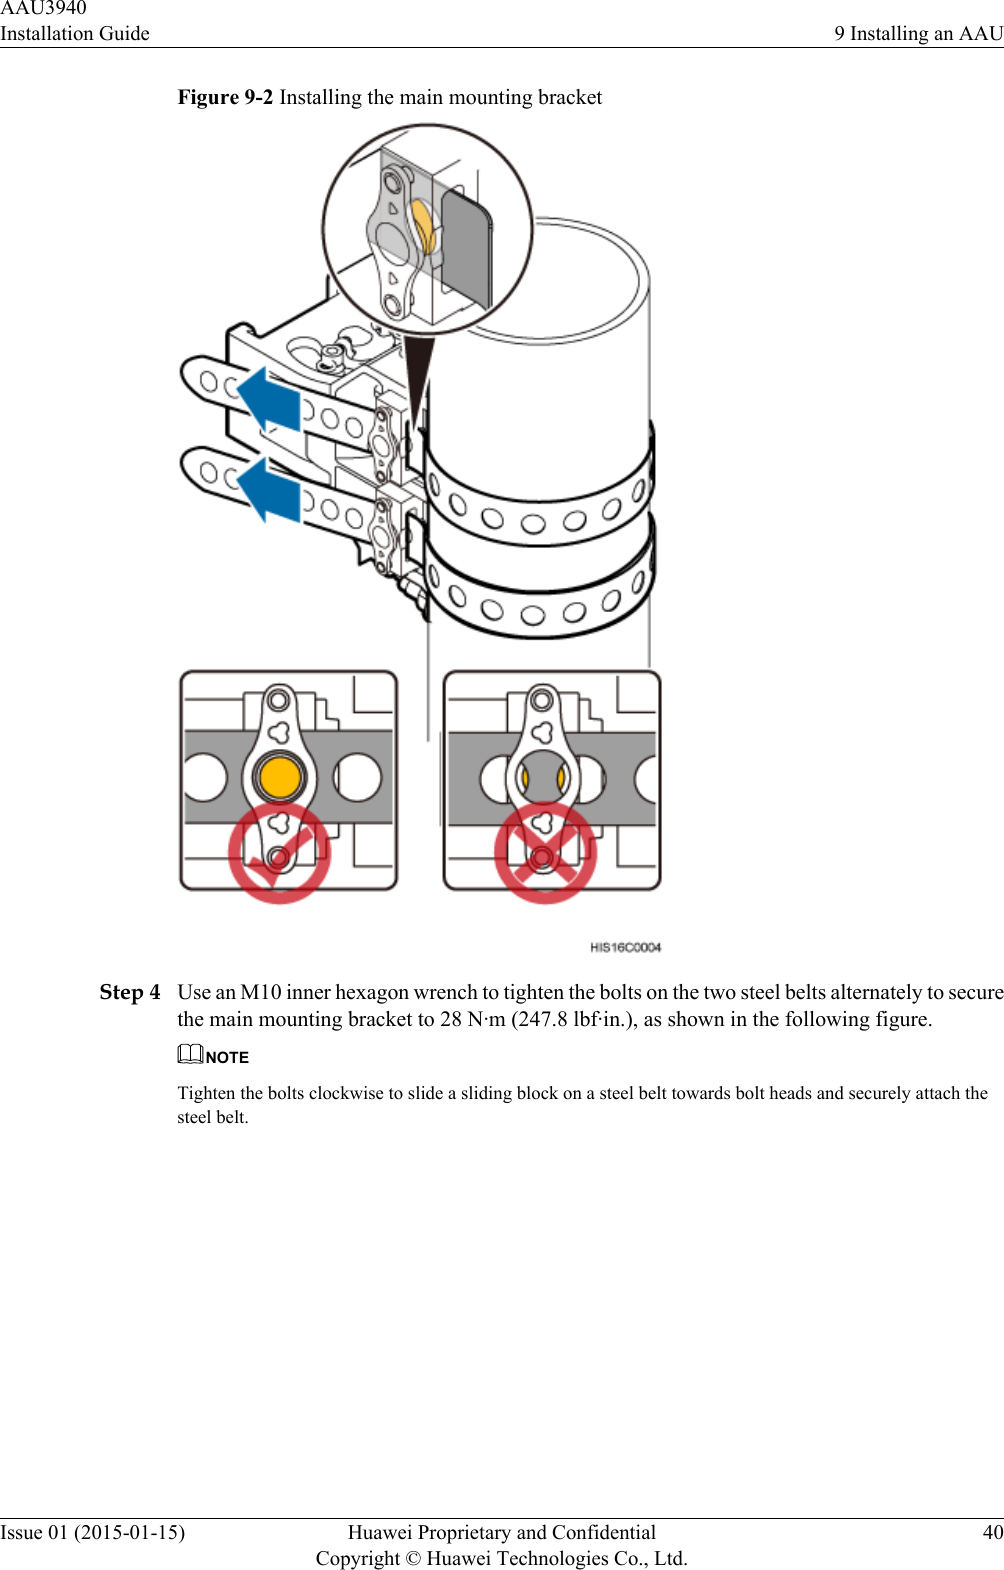 Figure 9-2 Installing the main mounting bracketStep 4 Use an M10 inner hexagon wrench to tighten the bolts on the two steel belts alternately to securethe main mounting bracket to 28 N·m (247.8 lbf·in.), as shown in the following figure.NOTETighten the bolts clockwise to slide a sliding block on a steel belt towards bolt heads and securely attach thesteel belt.AAU3940Installation Guide 9 Installing an AAUIssue 01 (2015-01-15) Huawei Proprietary and ConfidentialCopyright © Huawei Technologies Co., Ltd.40